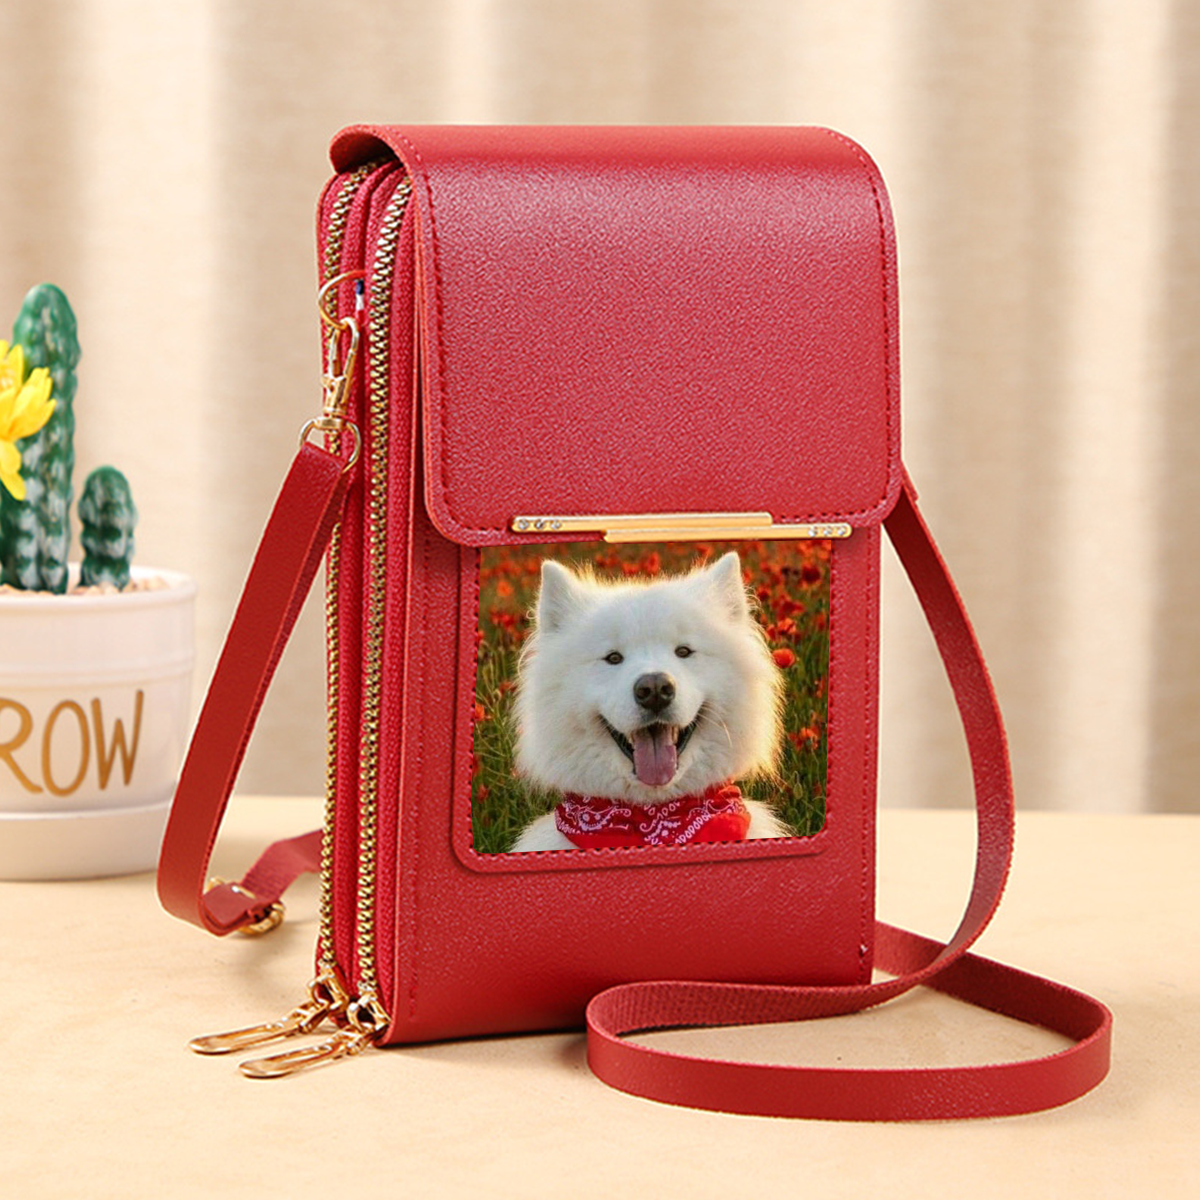 Personalized With Your Pet's Photo - Red